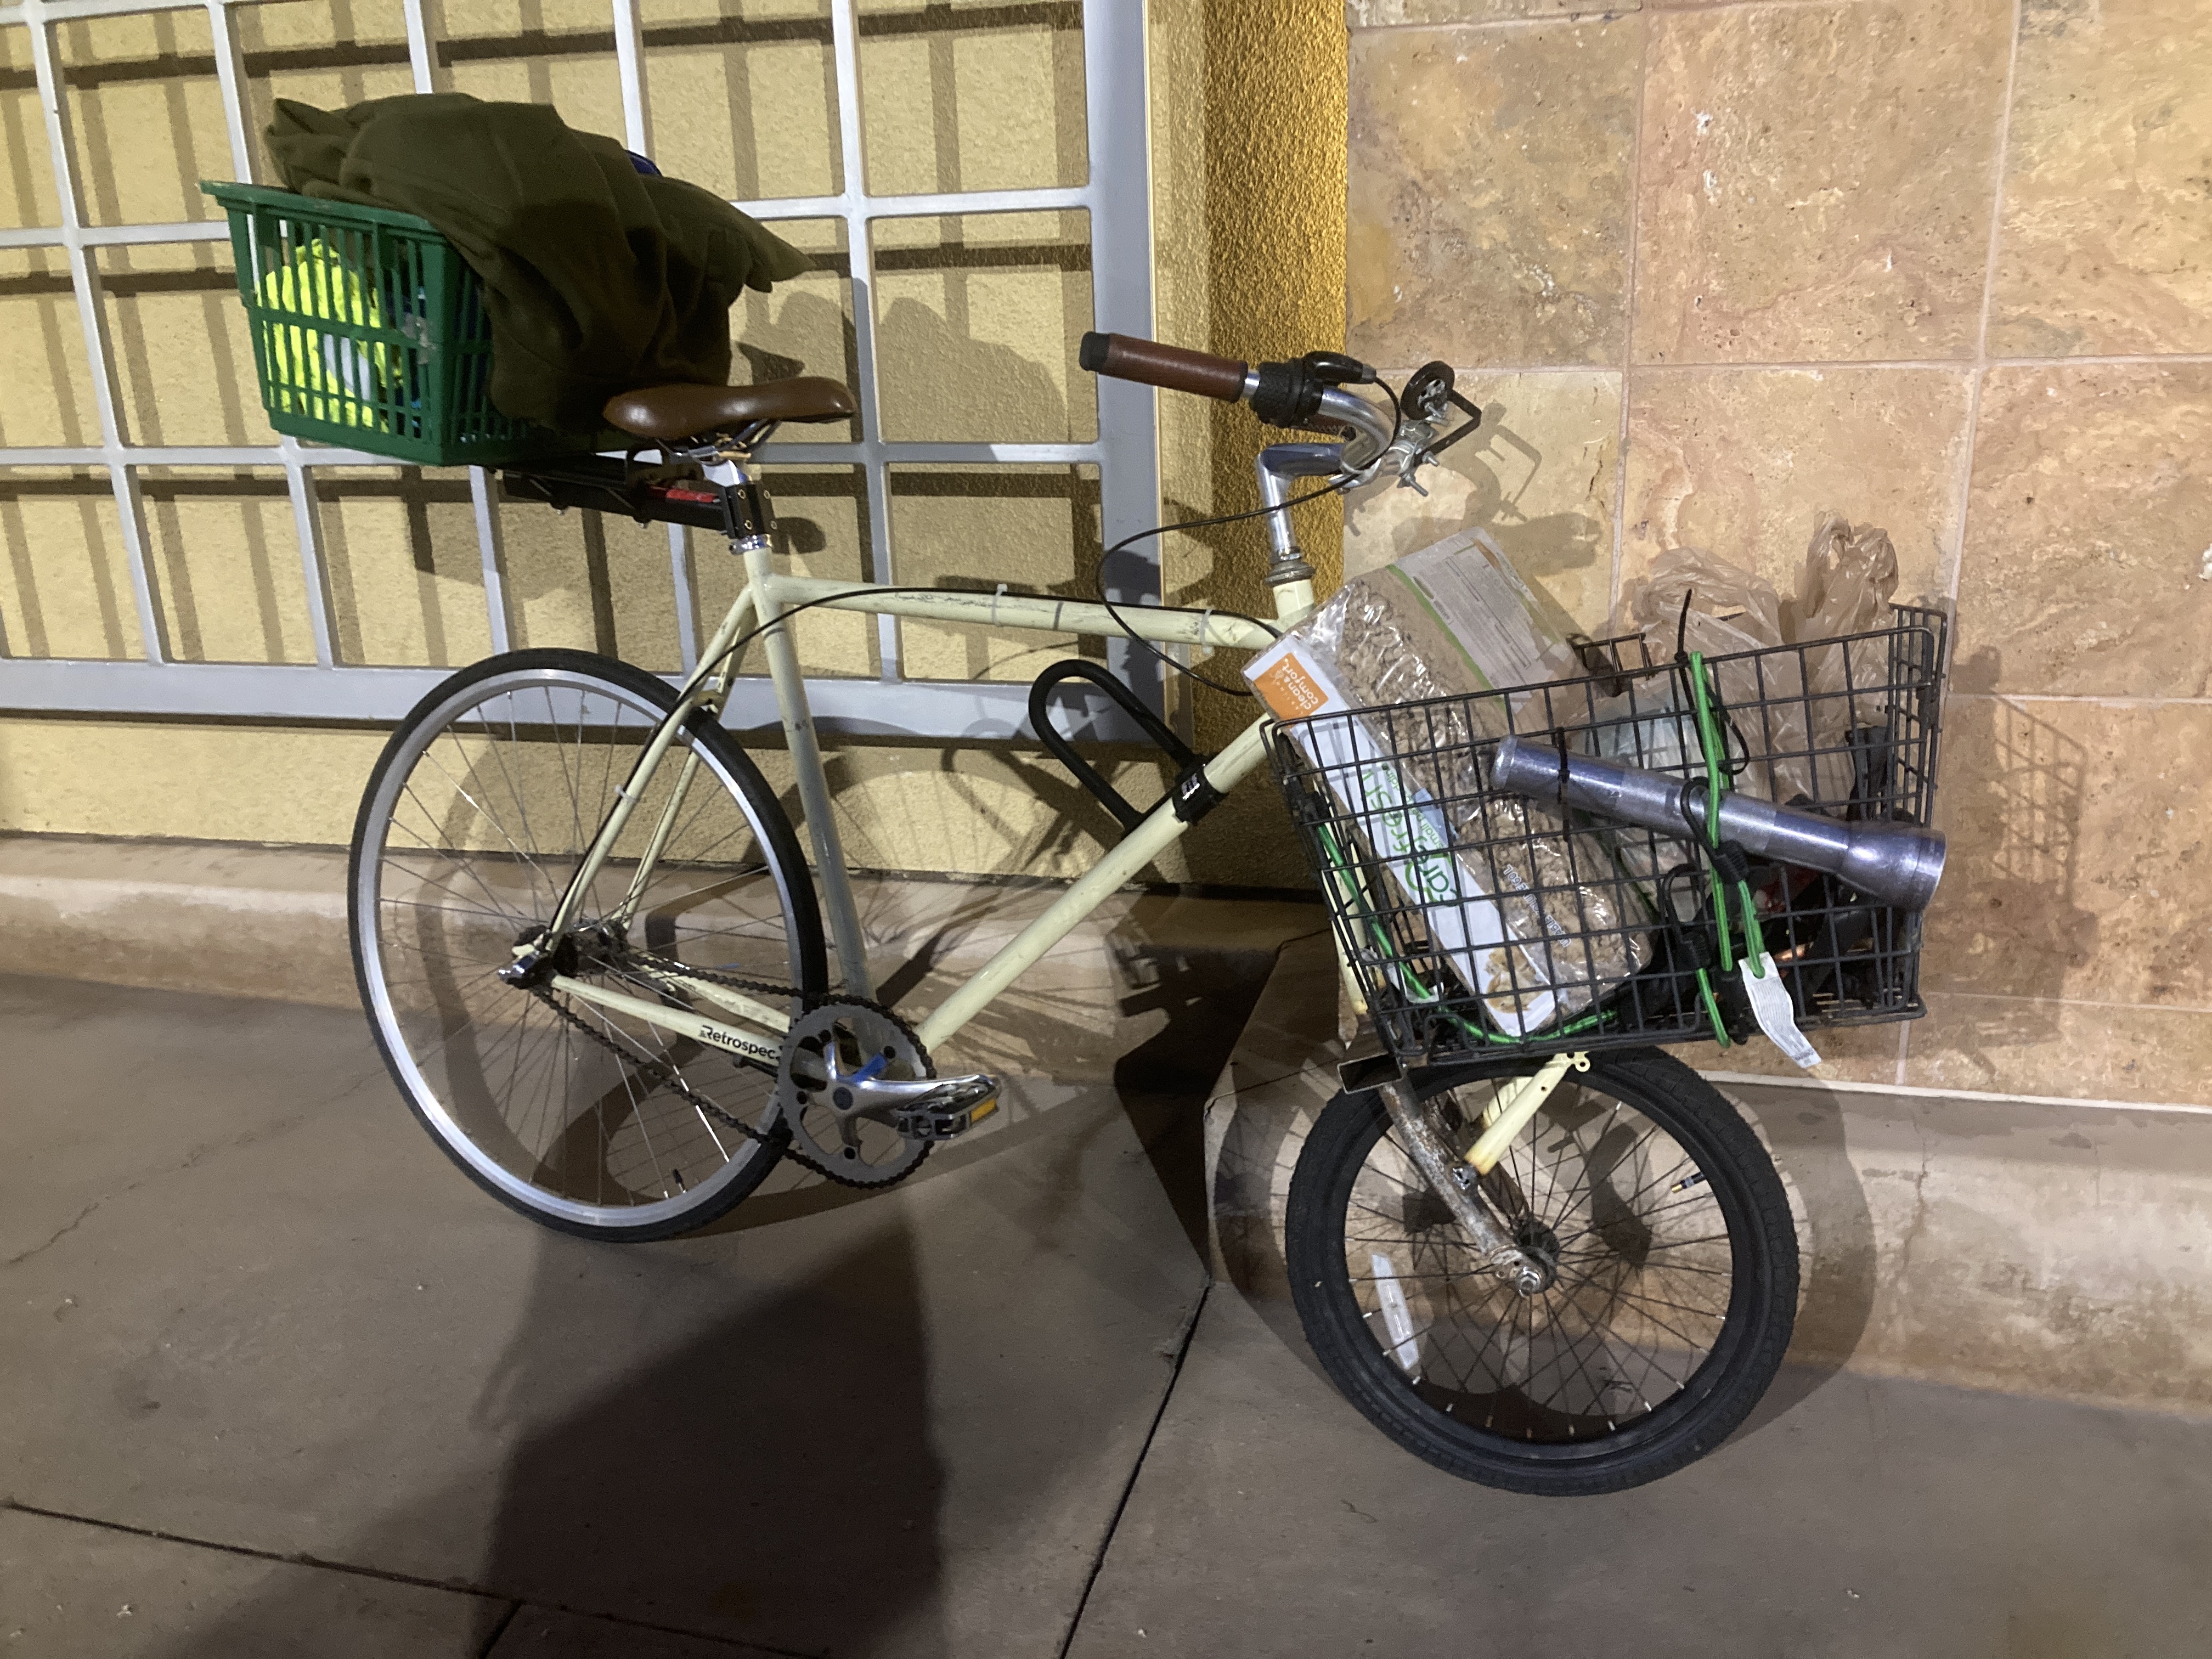 bike with a large rear wheel and small front wheel. a welded platform supports a large wire basket above the front wheel. a maglite flashlight is bungee corded to the basket